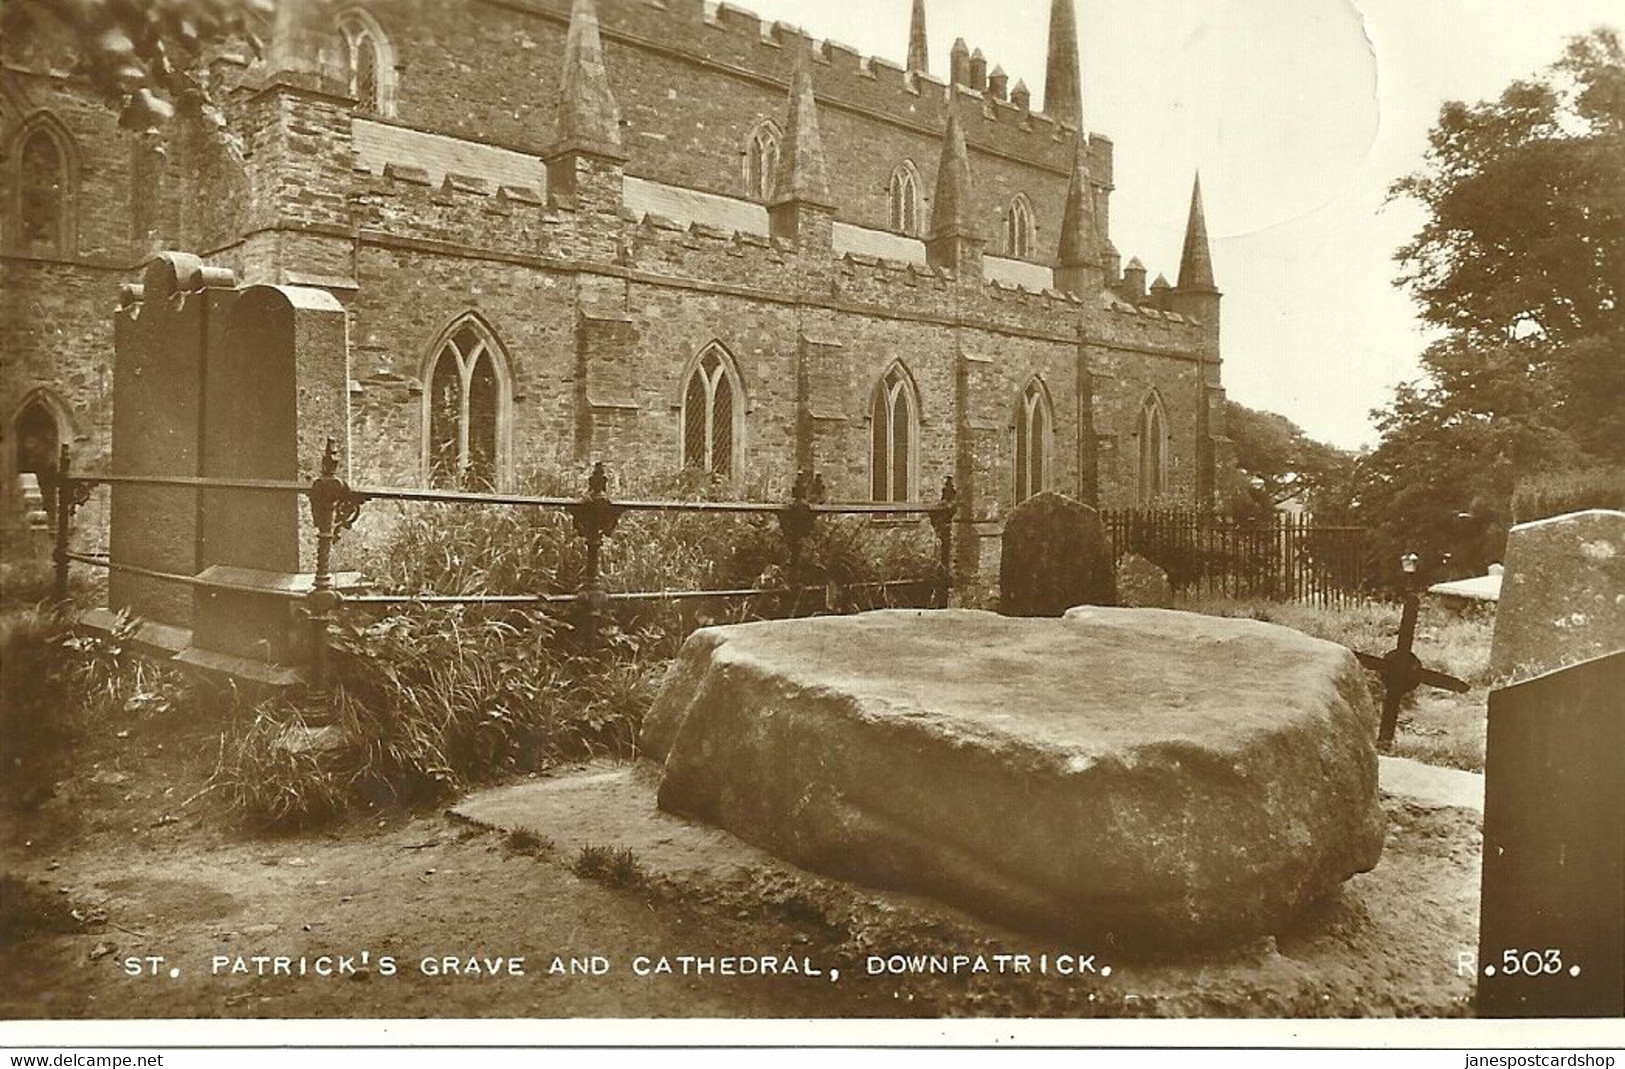 REAL PHOTOGRAPHIC POSTCARD - ST. PATRICK'S GRAVE AND CATHEDRAL - DOWNPATRICK - COUNTY DOWN - NORTHERN IRELAND - Down